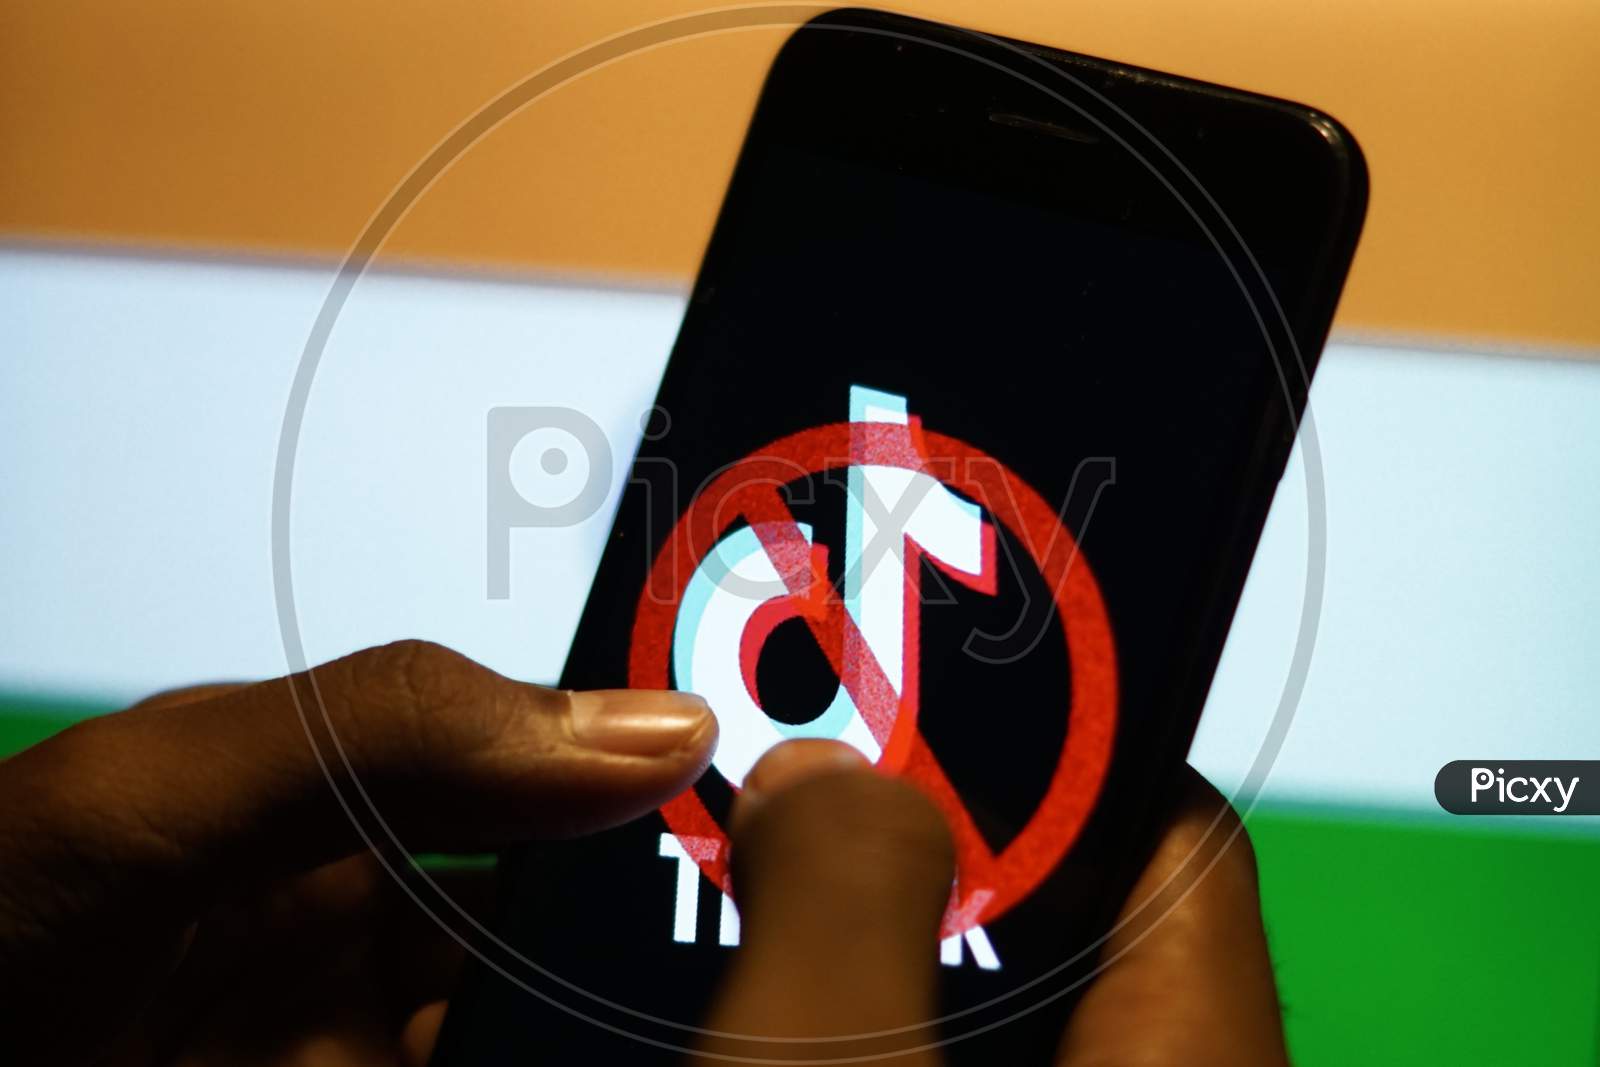 Banned Tiktok Application Logo On A Mobile Screen and fingers about to touch with Indian Flag in the background